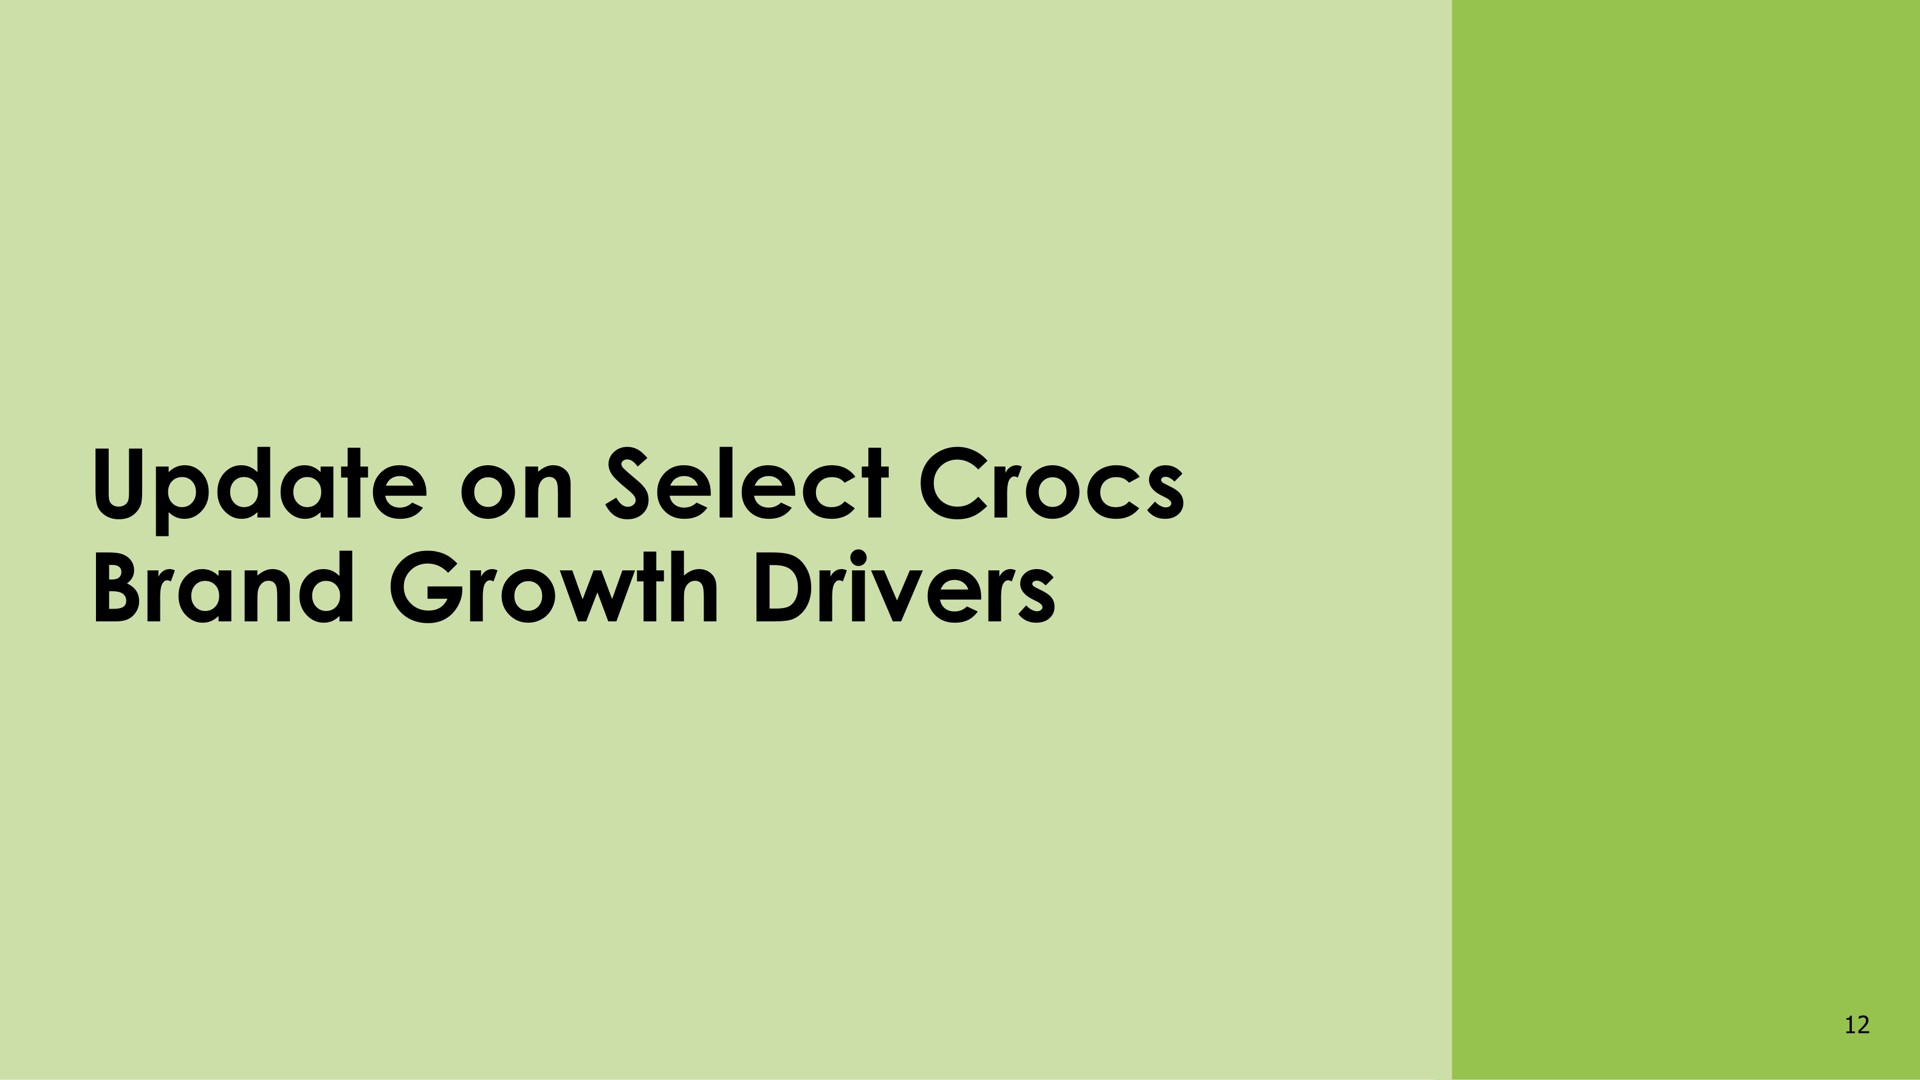 update on select brand growth drivers | Crocs